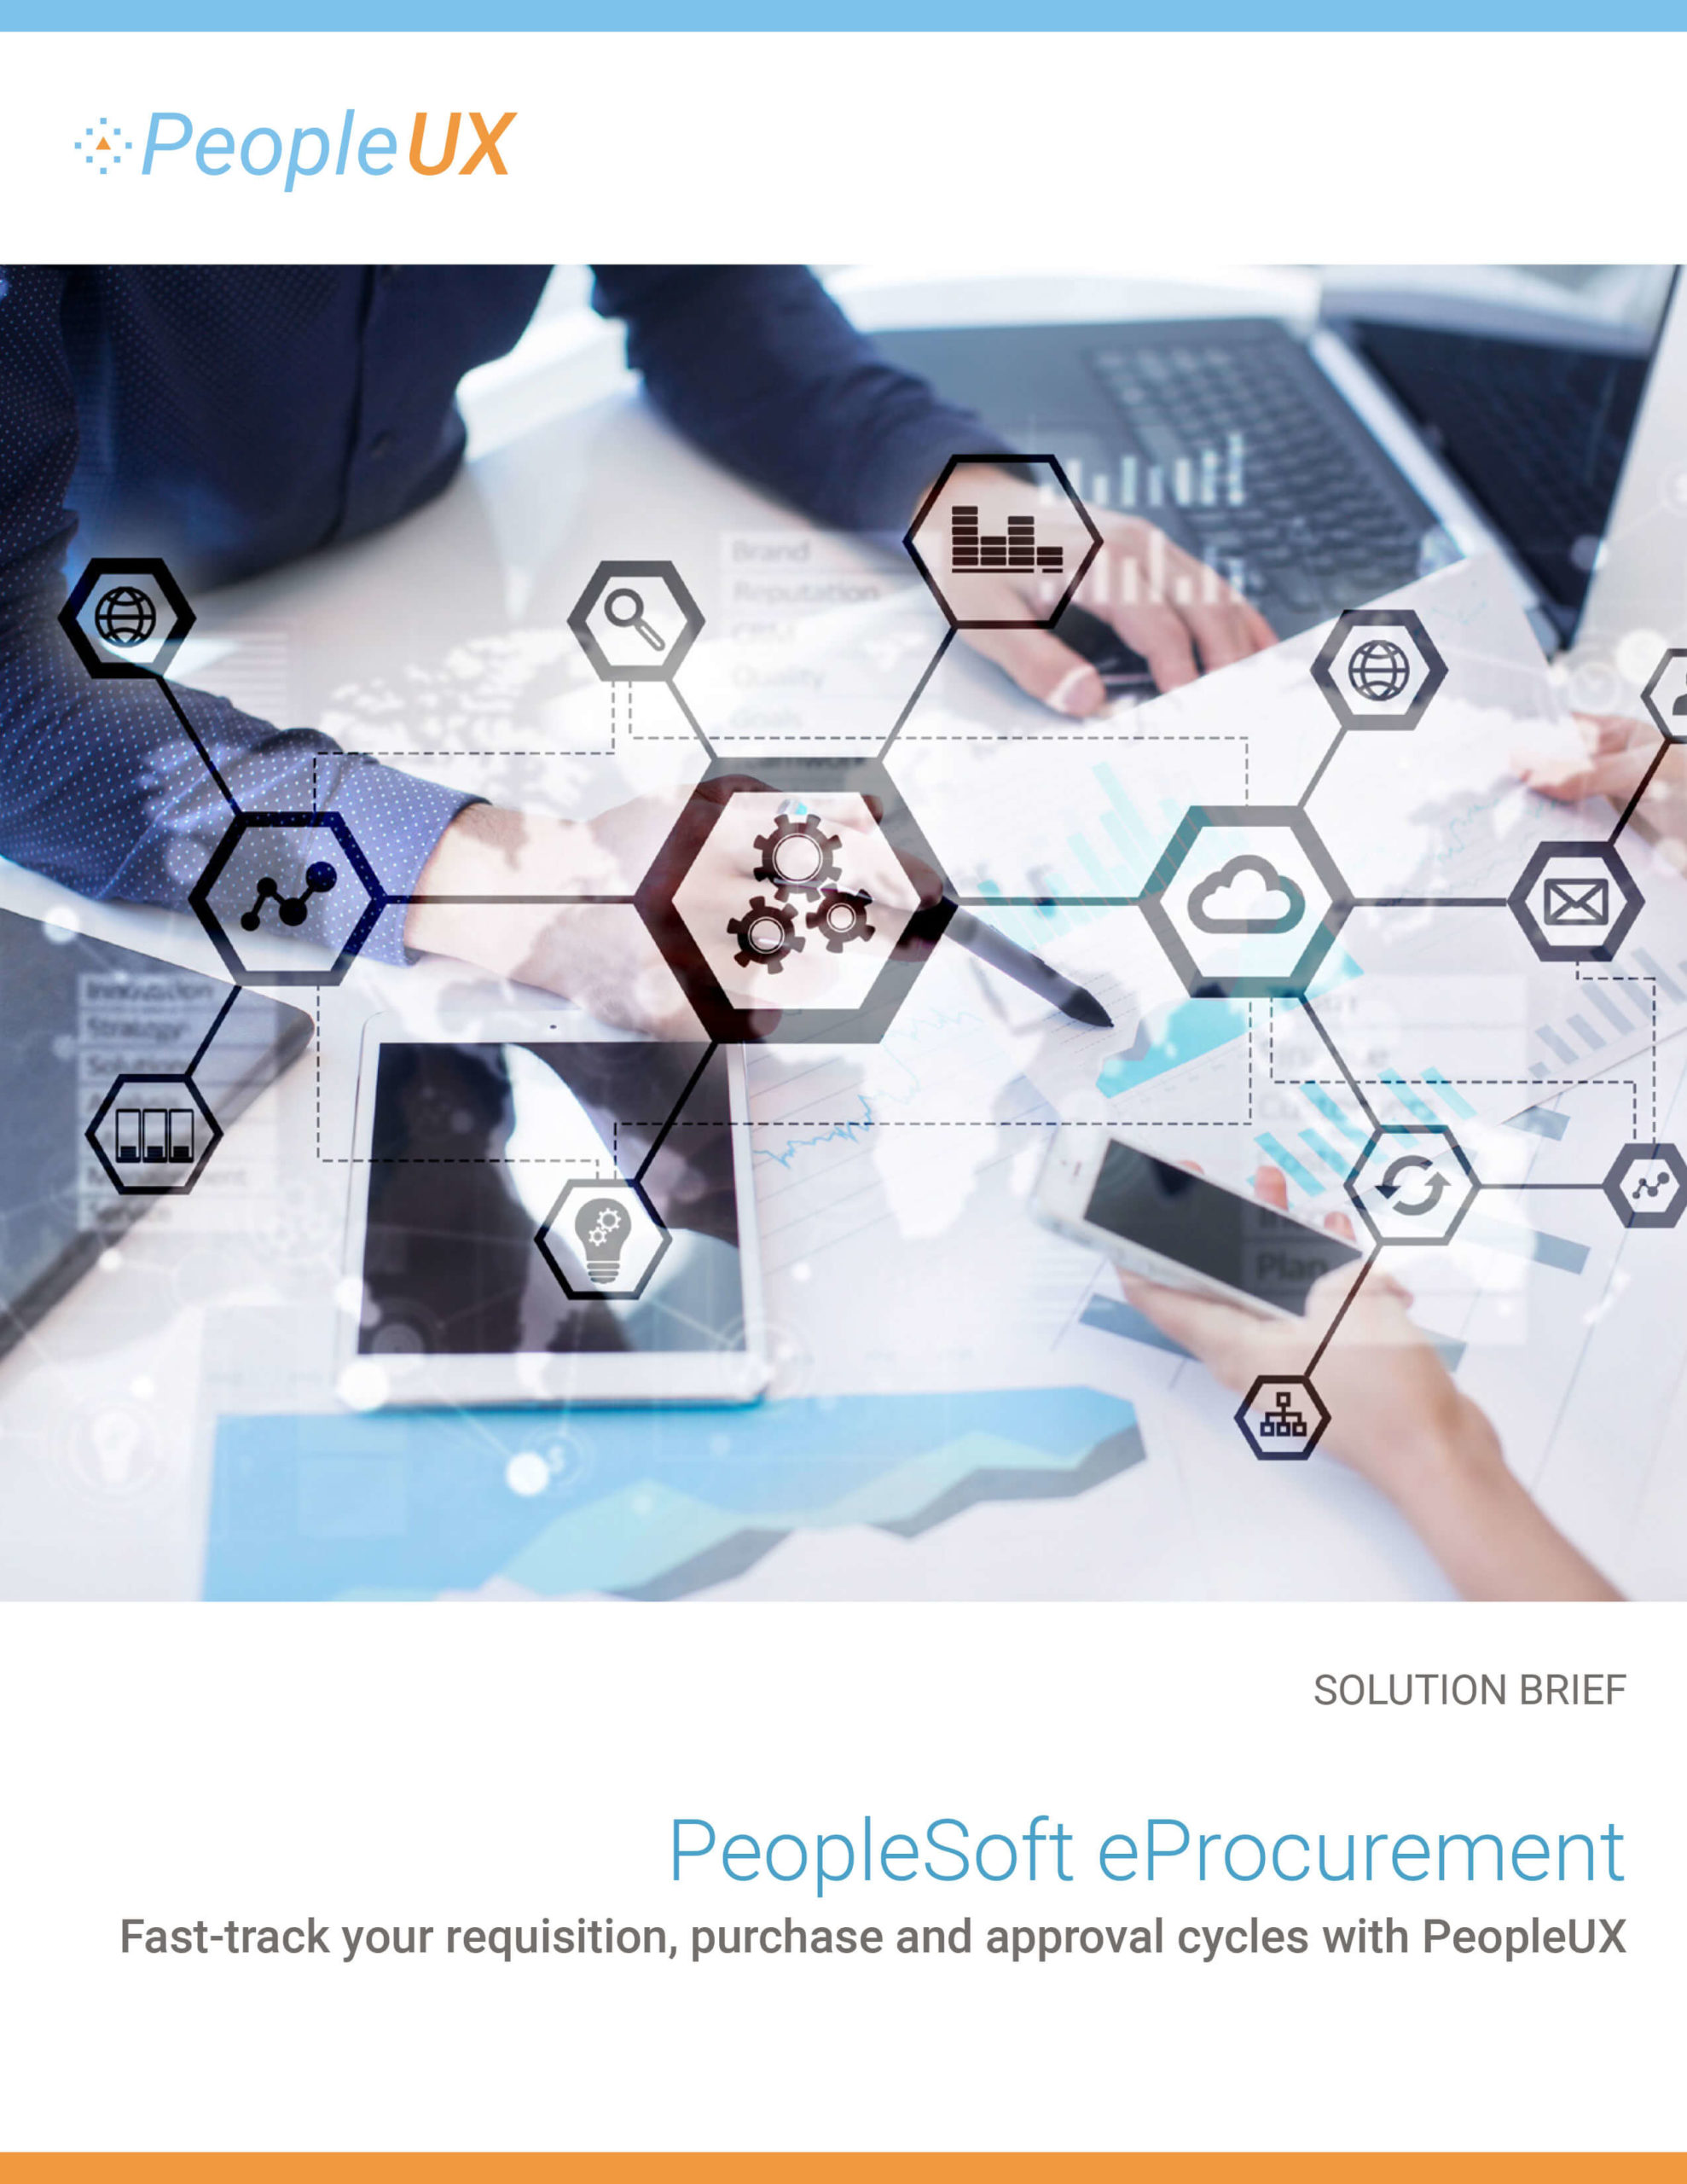 Improving the PeopleSoft eProcurement User Experience